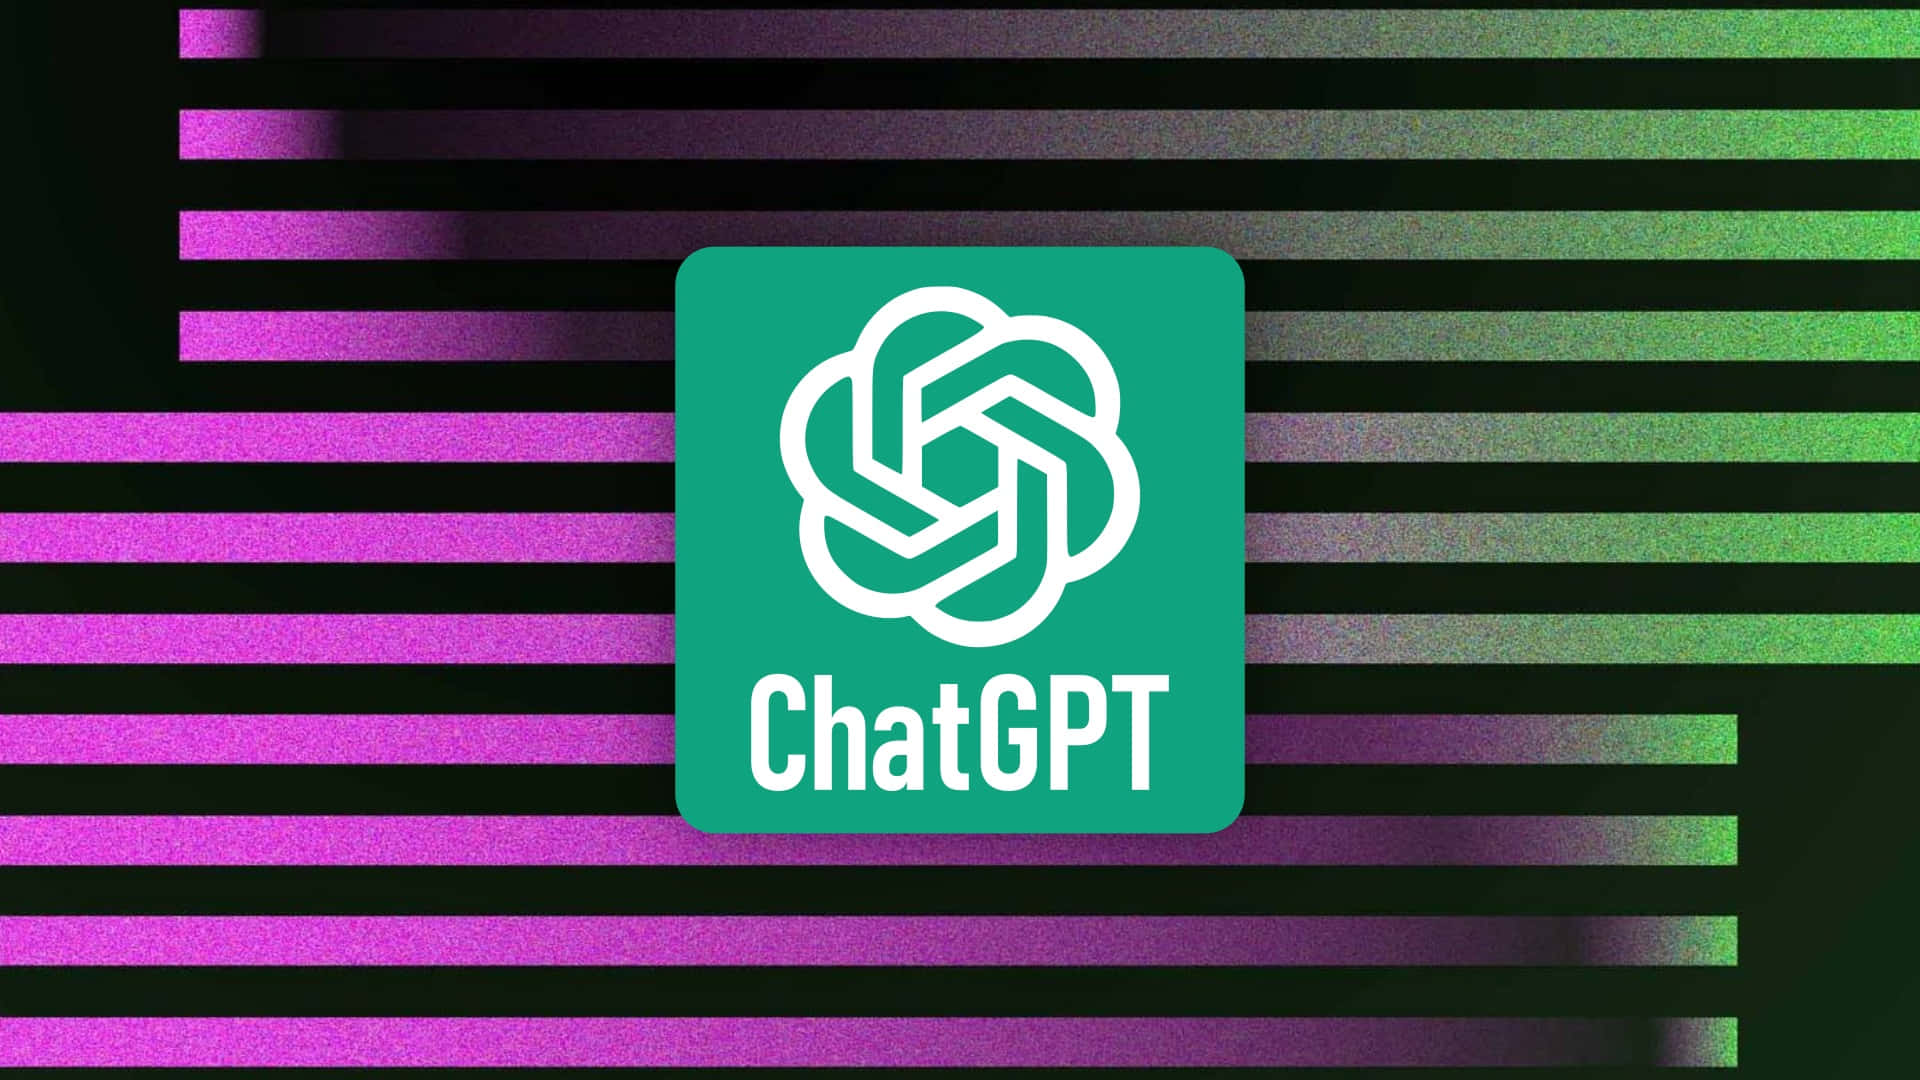 Chatgpt Logo On A Black And Purple Background Wallpaper